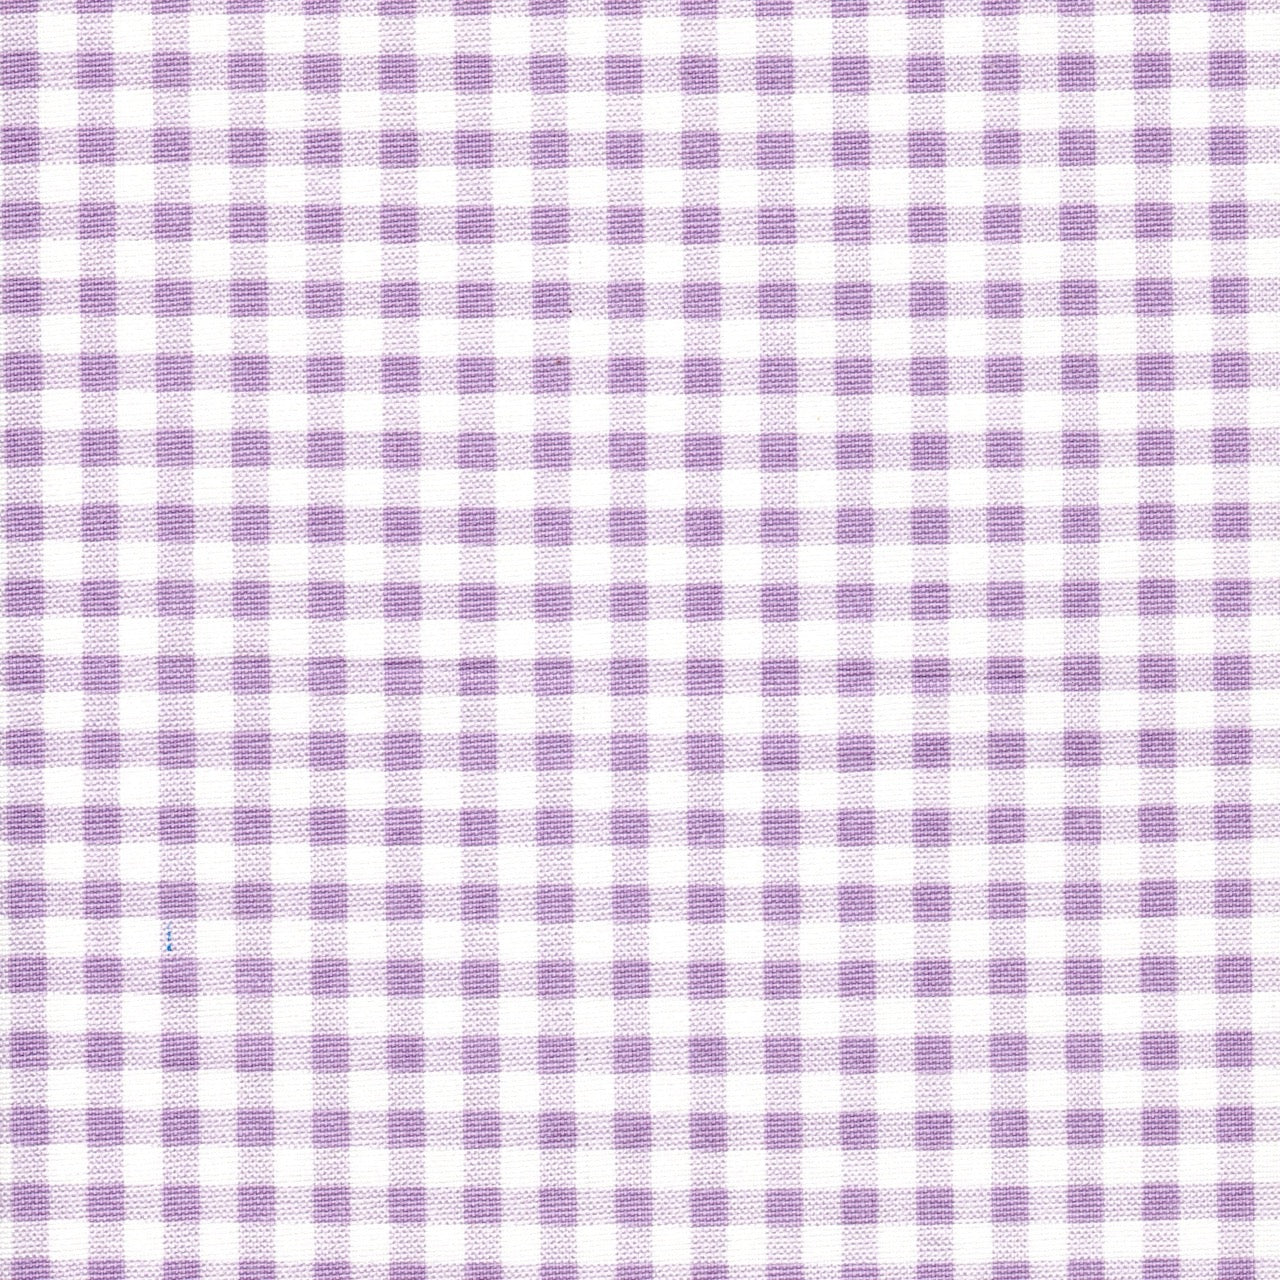 Duvet Cover in Orchid Large Gingham Check on White